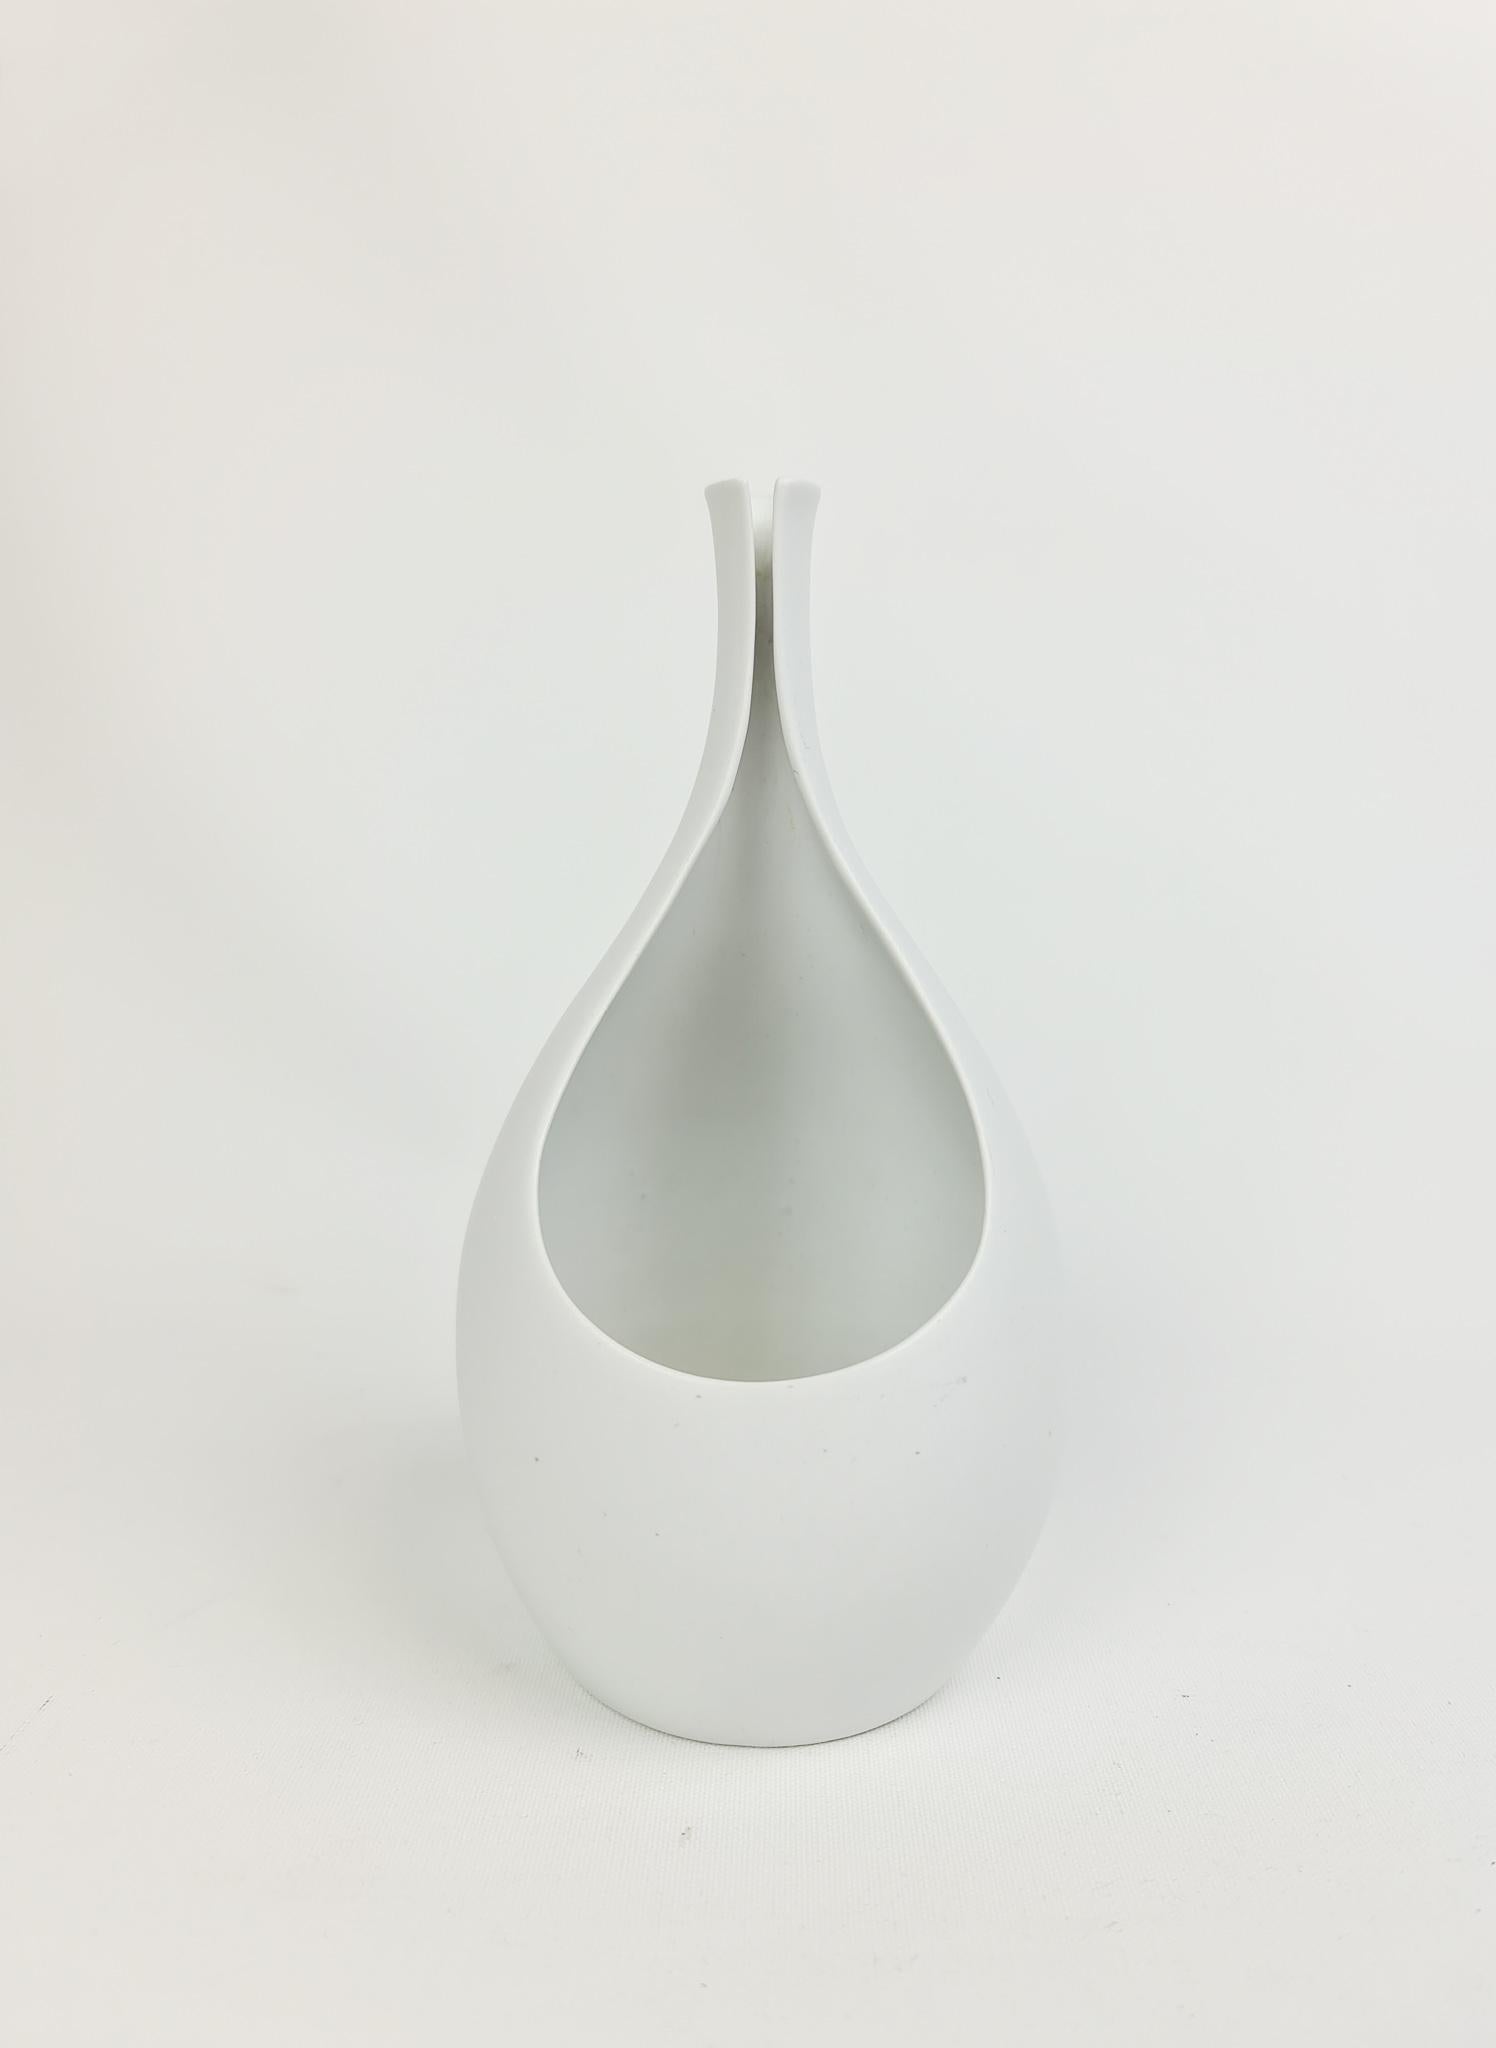 The pungo vase made in Sweden 1950s by the master Stig Lindberg for Gustavsberg. The pungo vase have the most beautiful form and with its matt white glaze this is a piece for many environments.

Good vintage condition, small glaze missing on top.